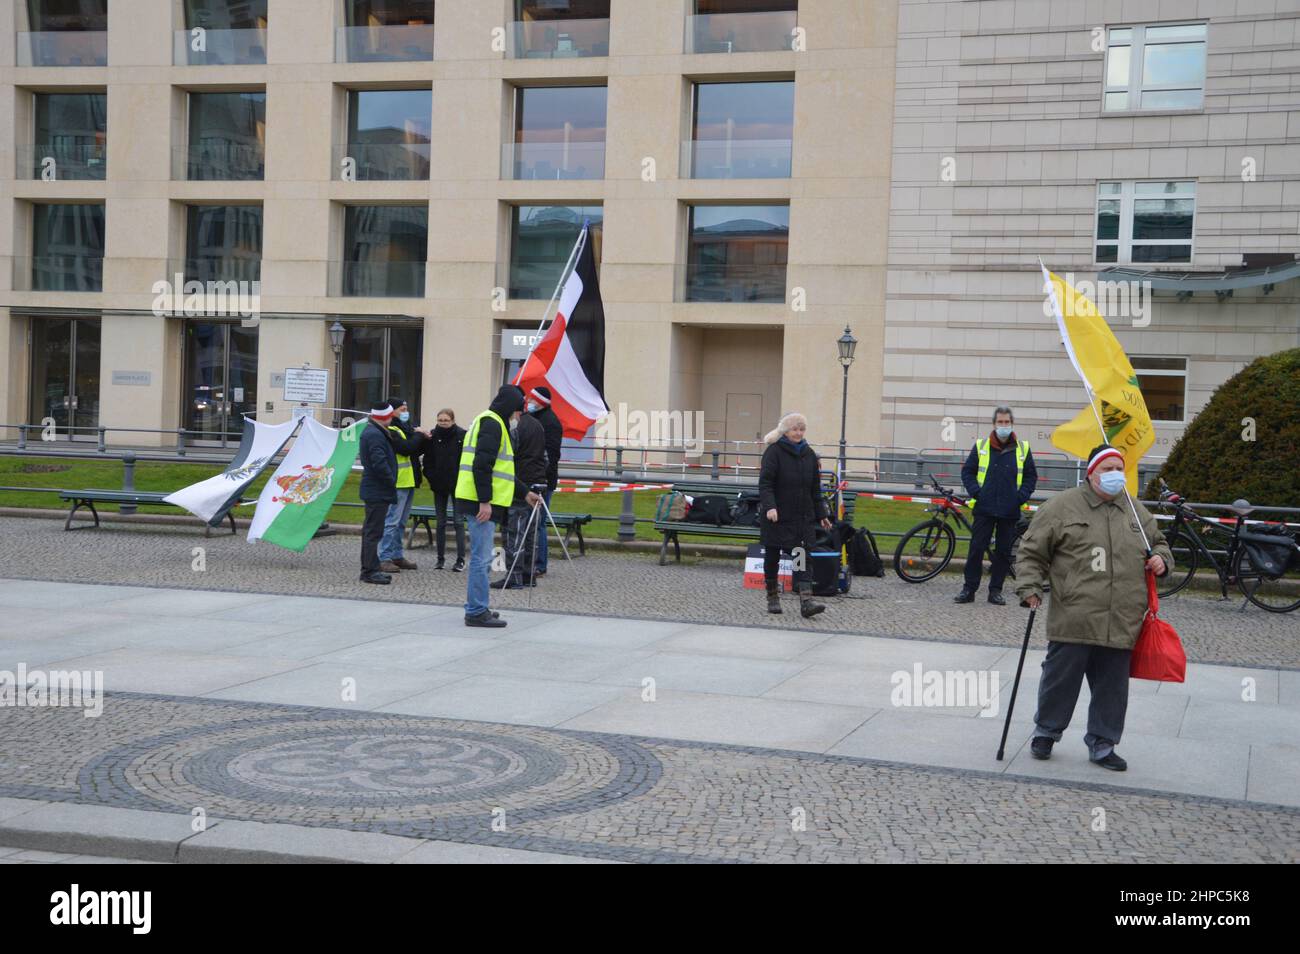 'Reich citizens' demonstrated in front of The Embassy of The United States of America at Pariser Platz in Berlin, Germany. 'Reich citizens'  rejict the legitimacy of the modern German state, The Federal Republic of Germany, in favour of the German Reich, which existed from 1871 to 1945. Stock Photo